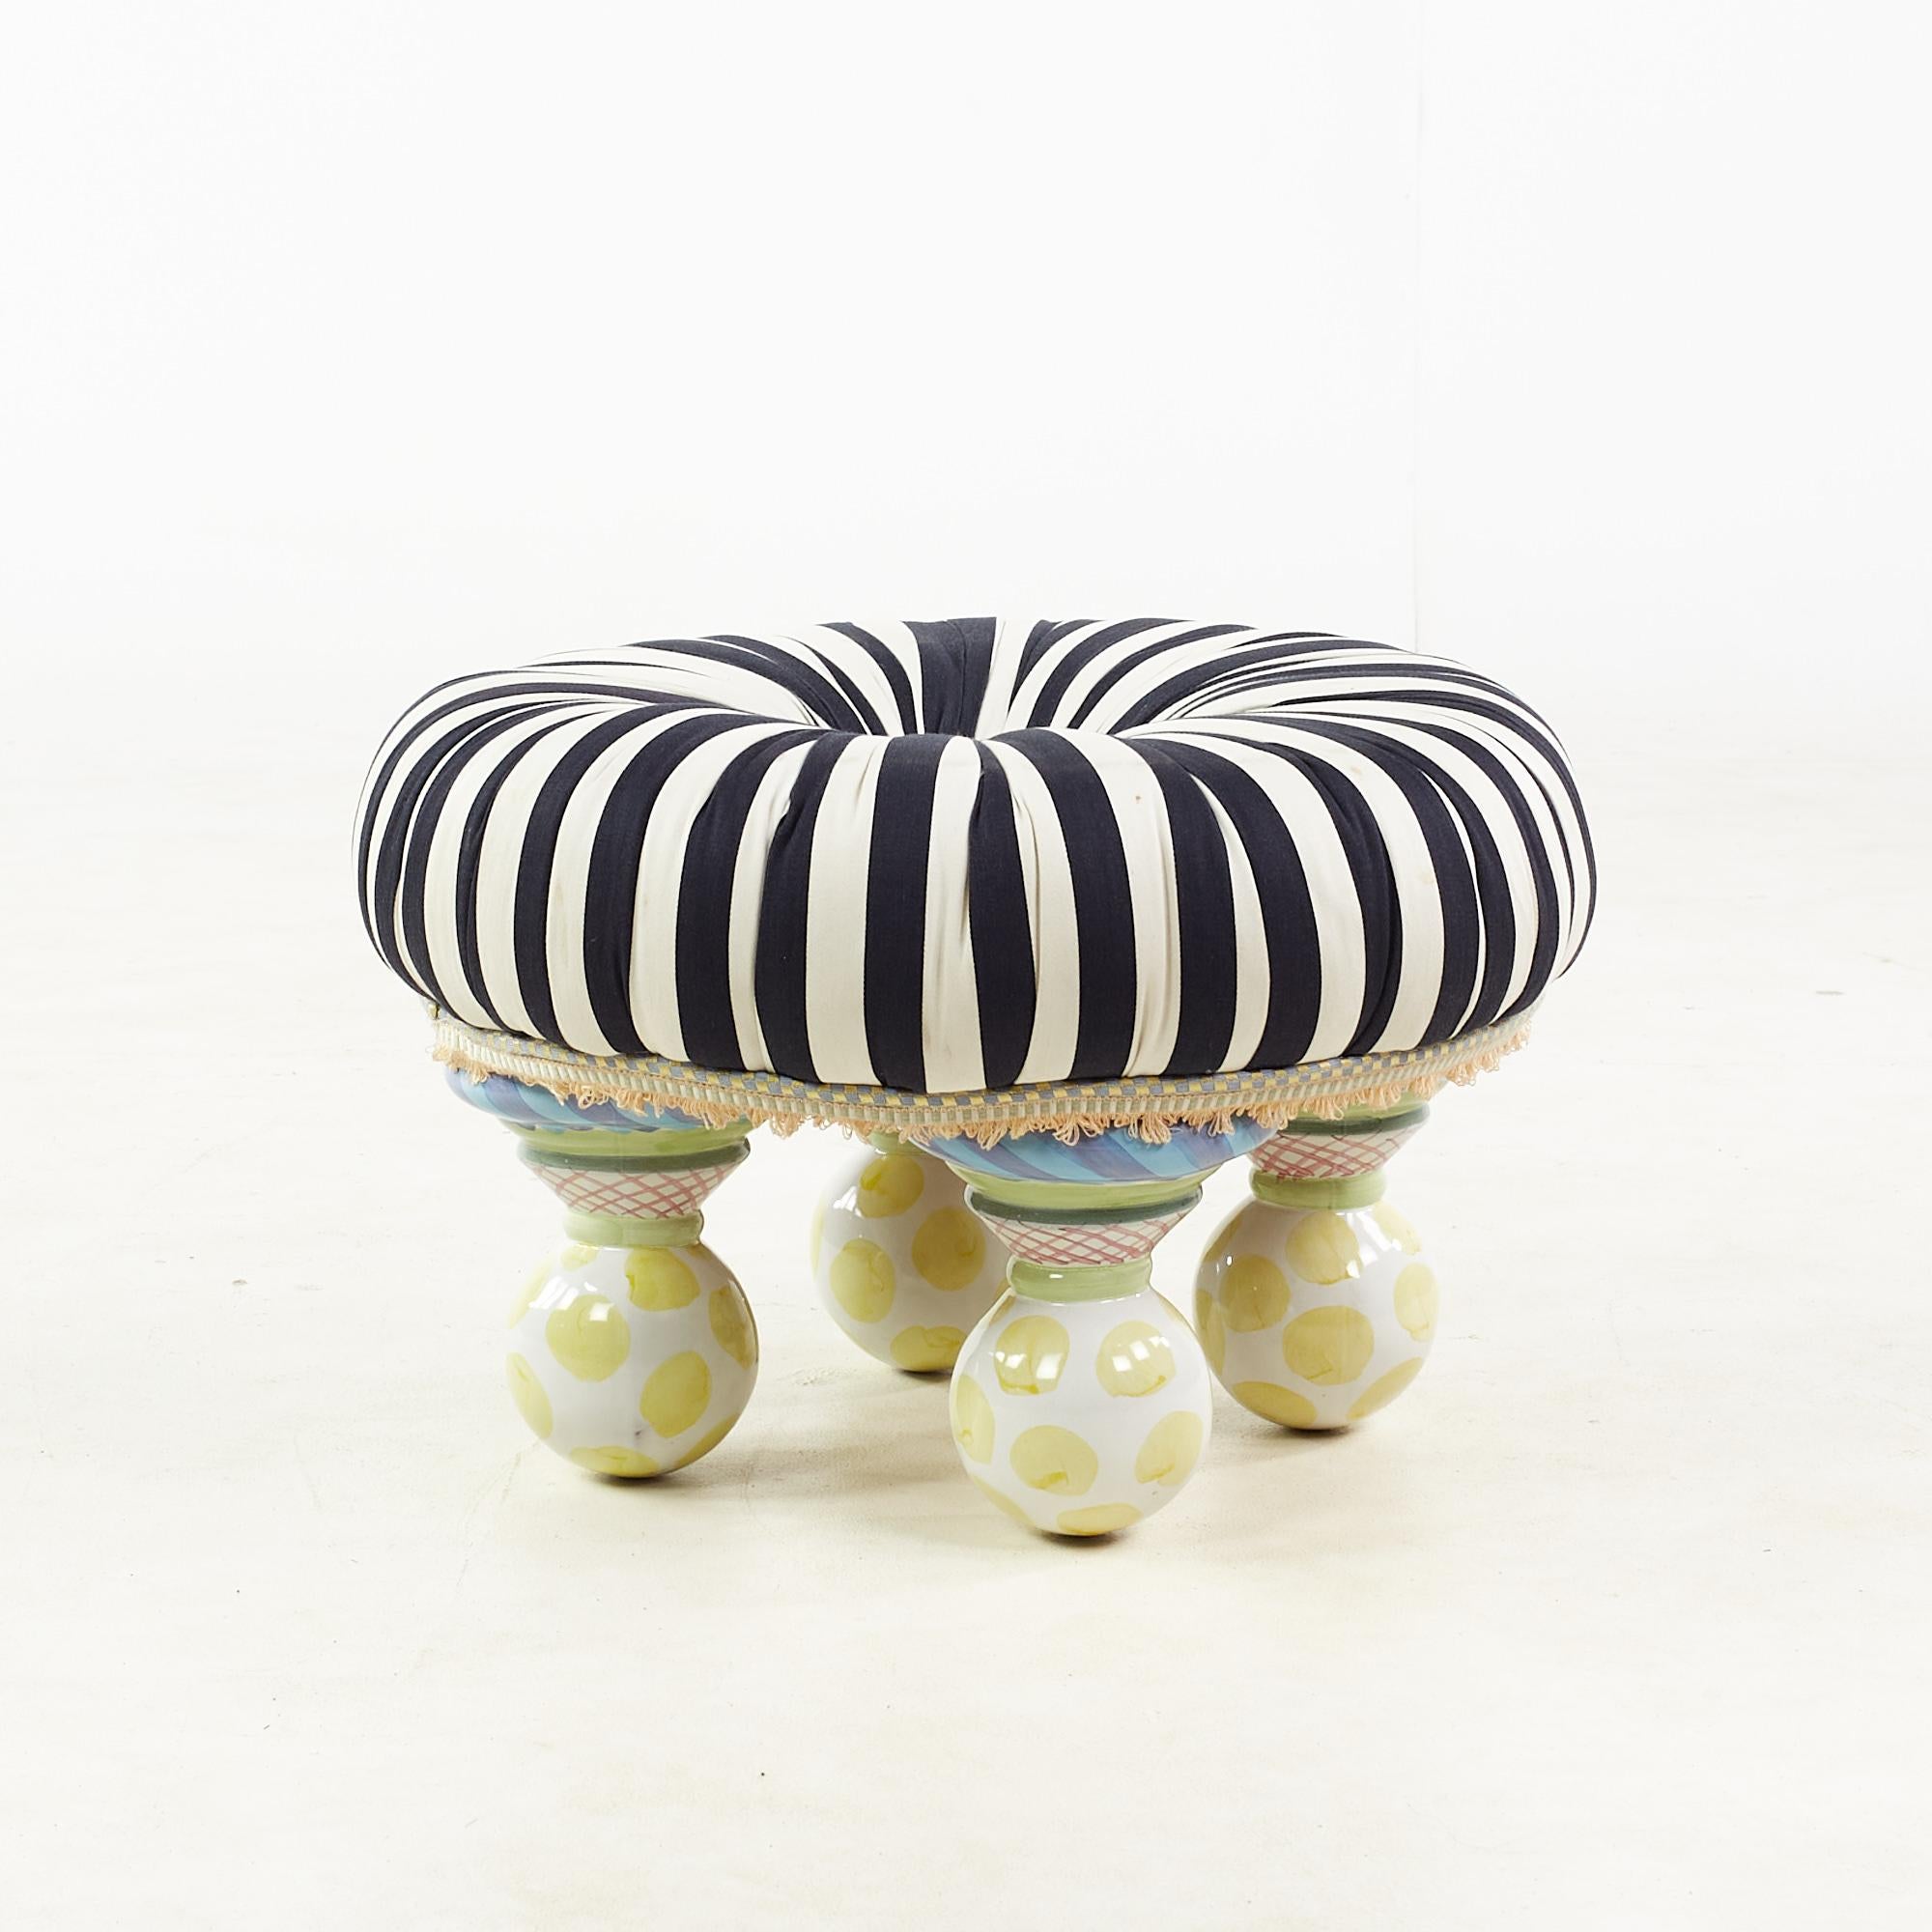 Modern MacKenzie Childs Contemporary Ottoman with Hand Painted Porcelain Legs